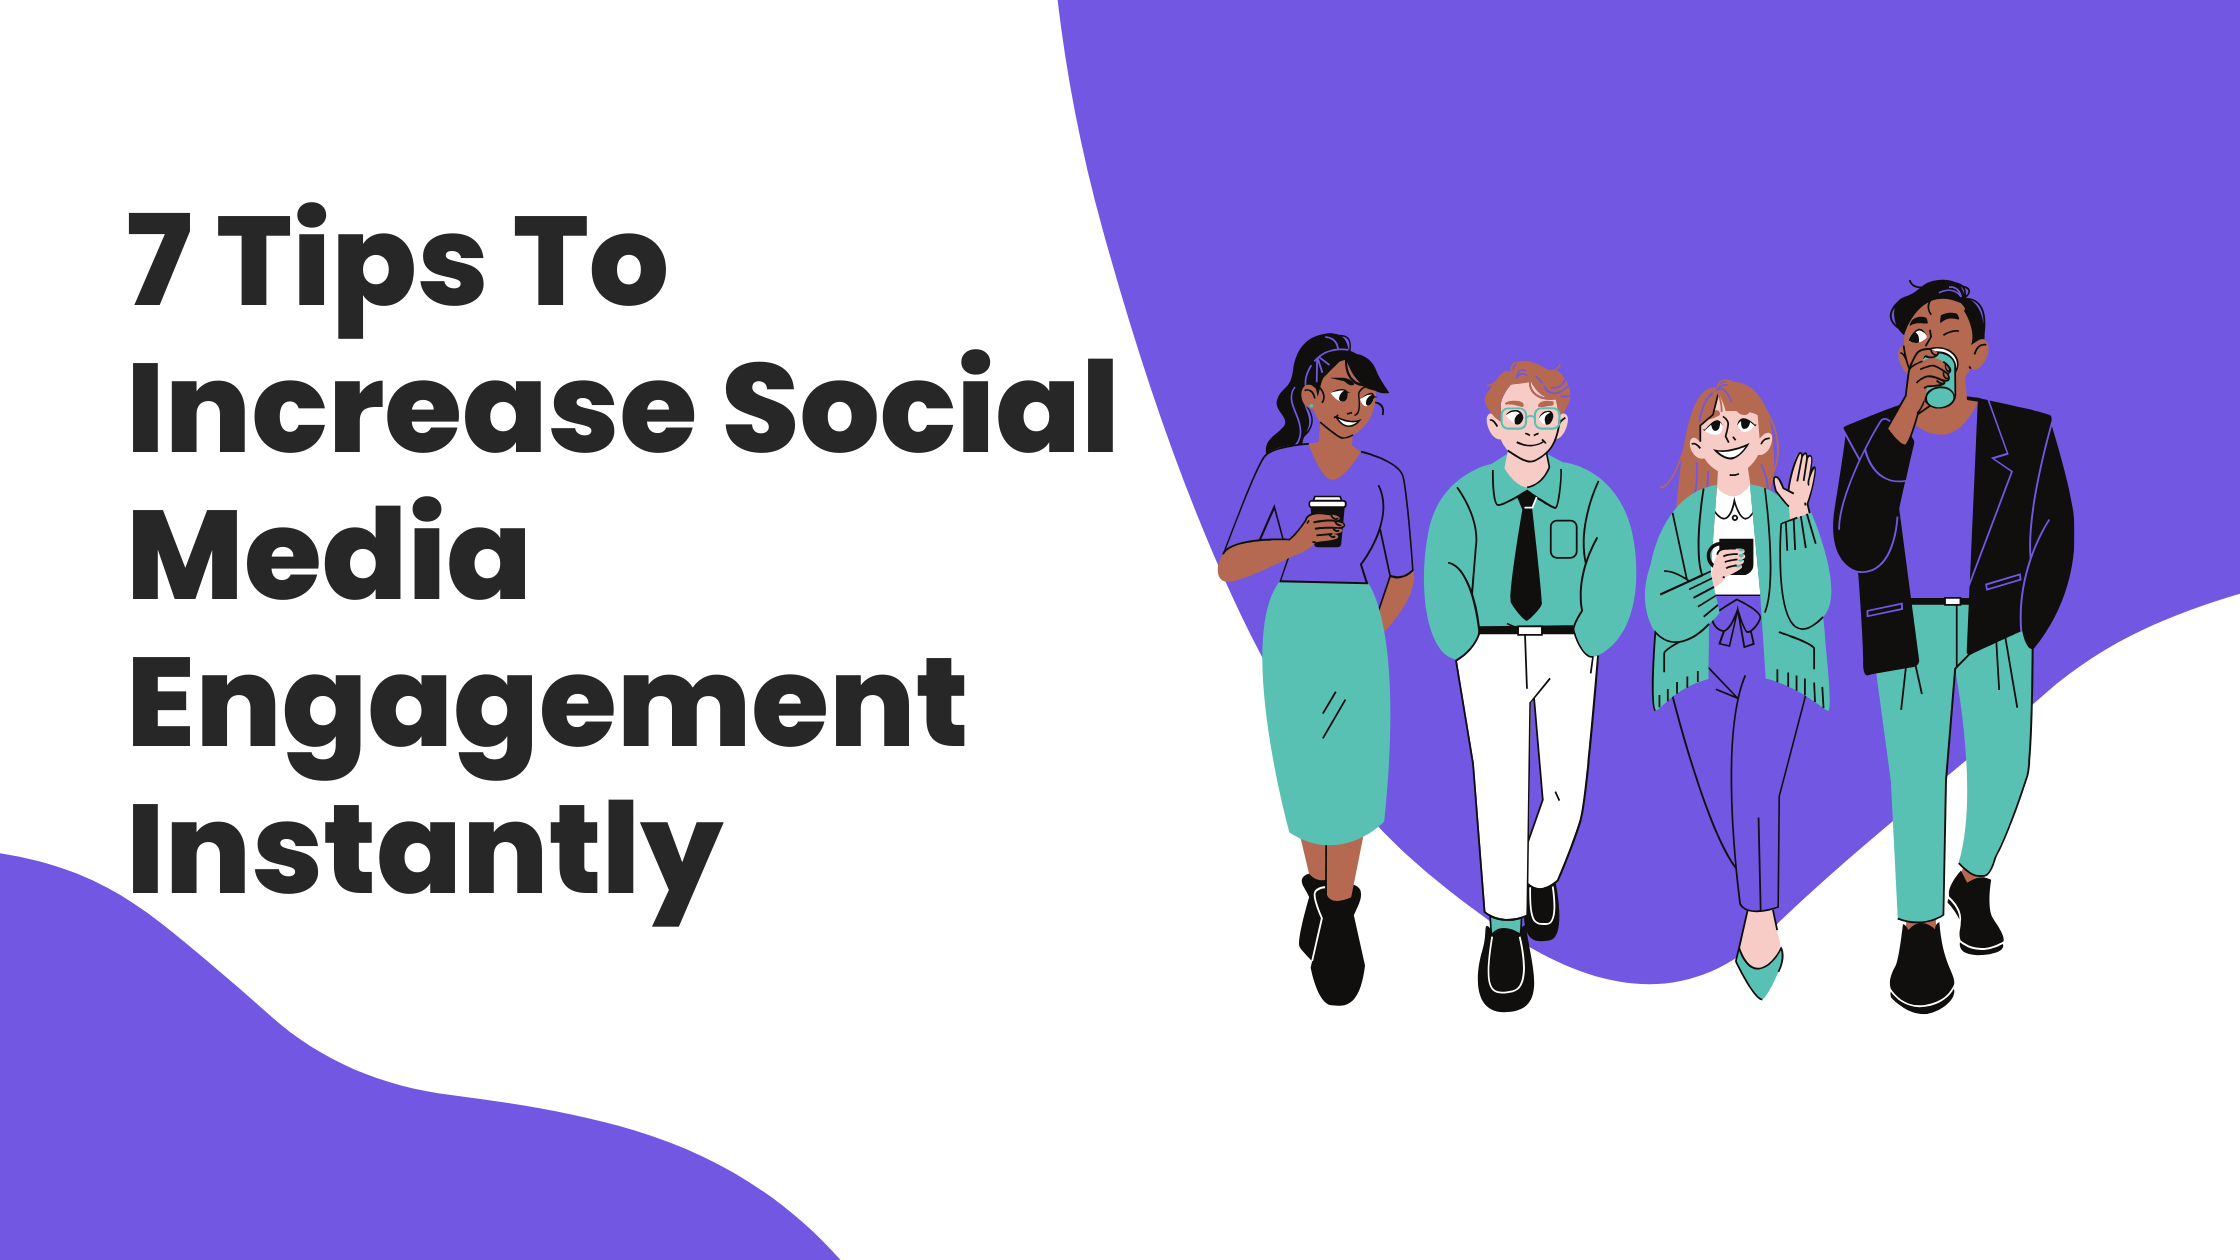 7 Tips To Increase Social Media Engagement Instantly